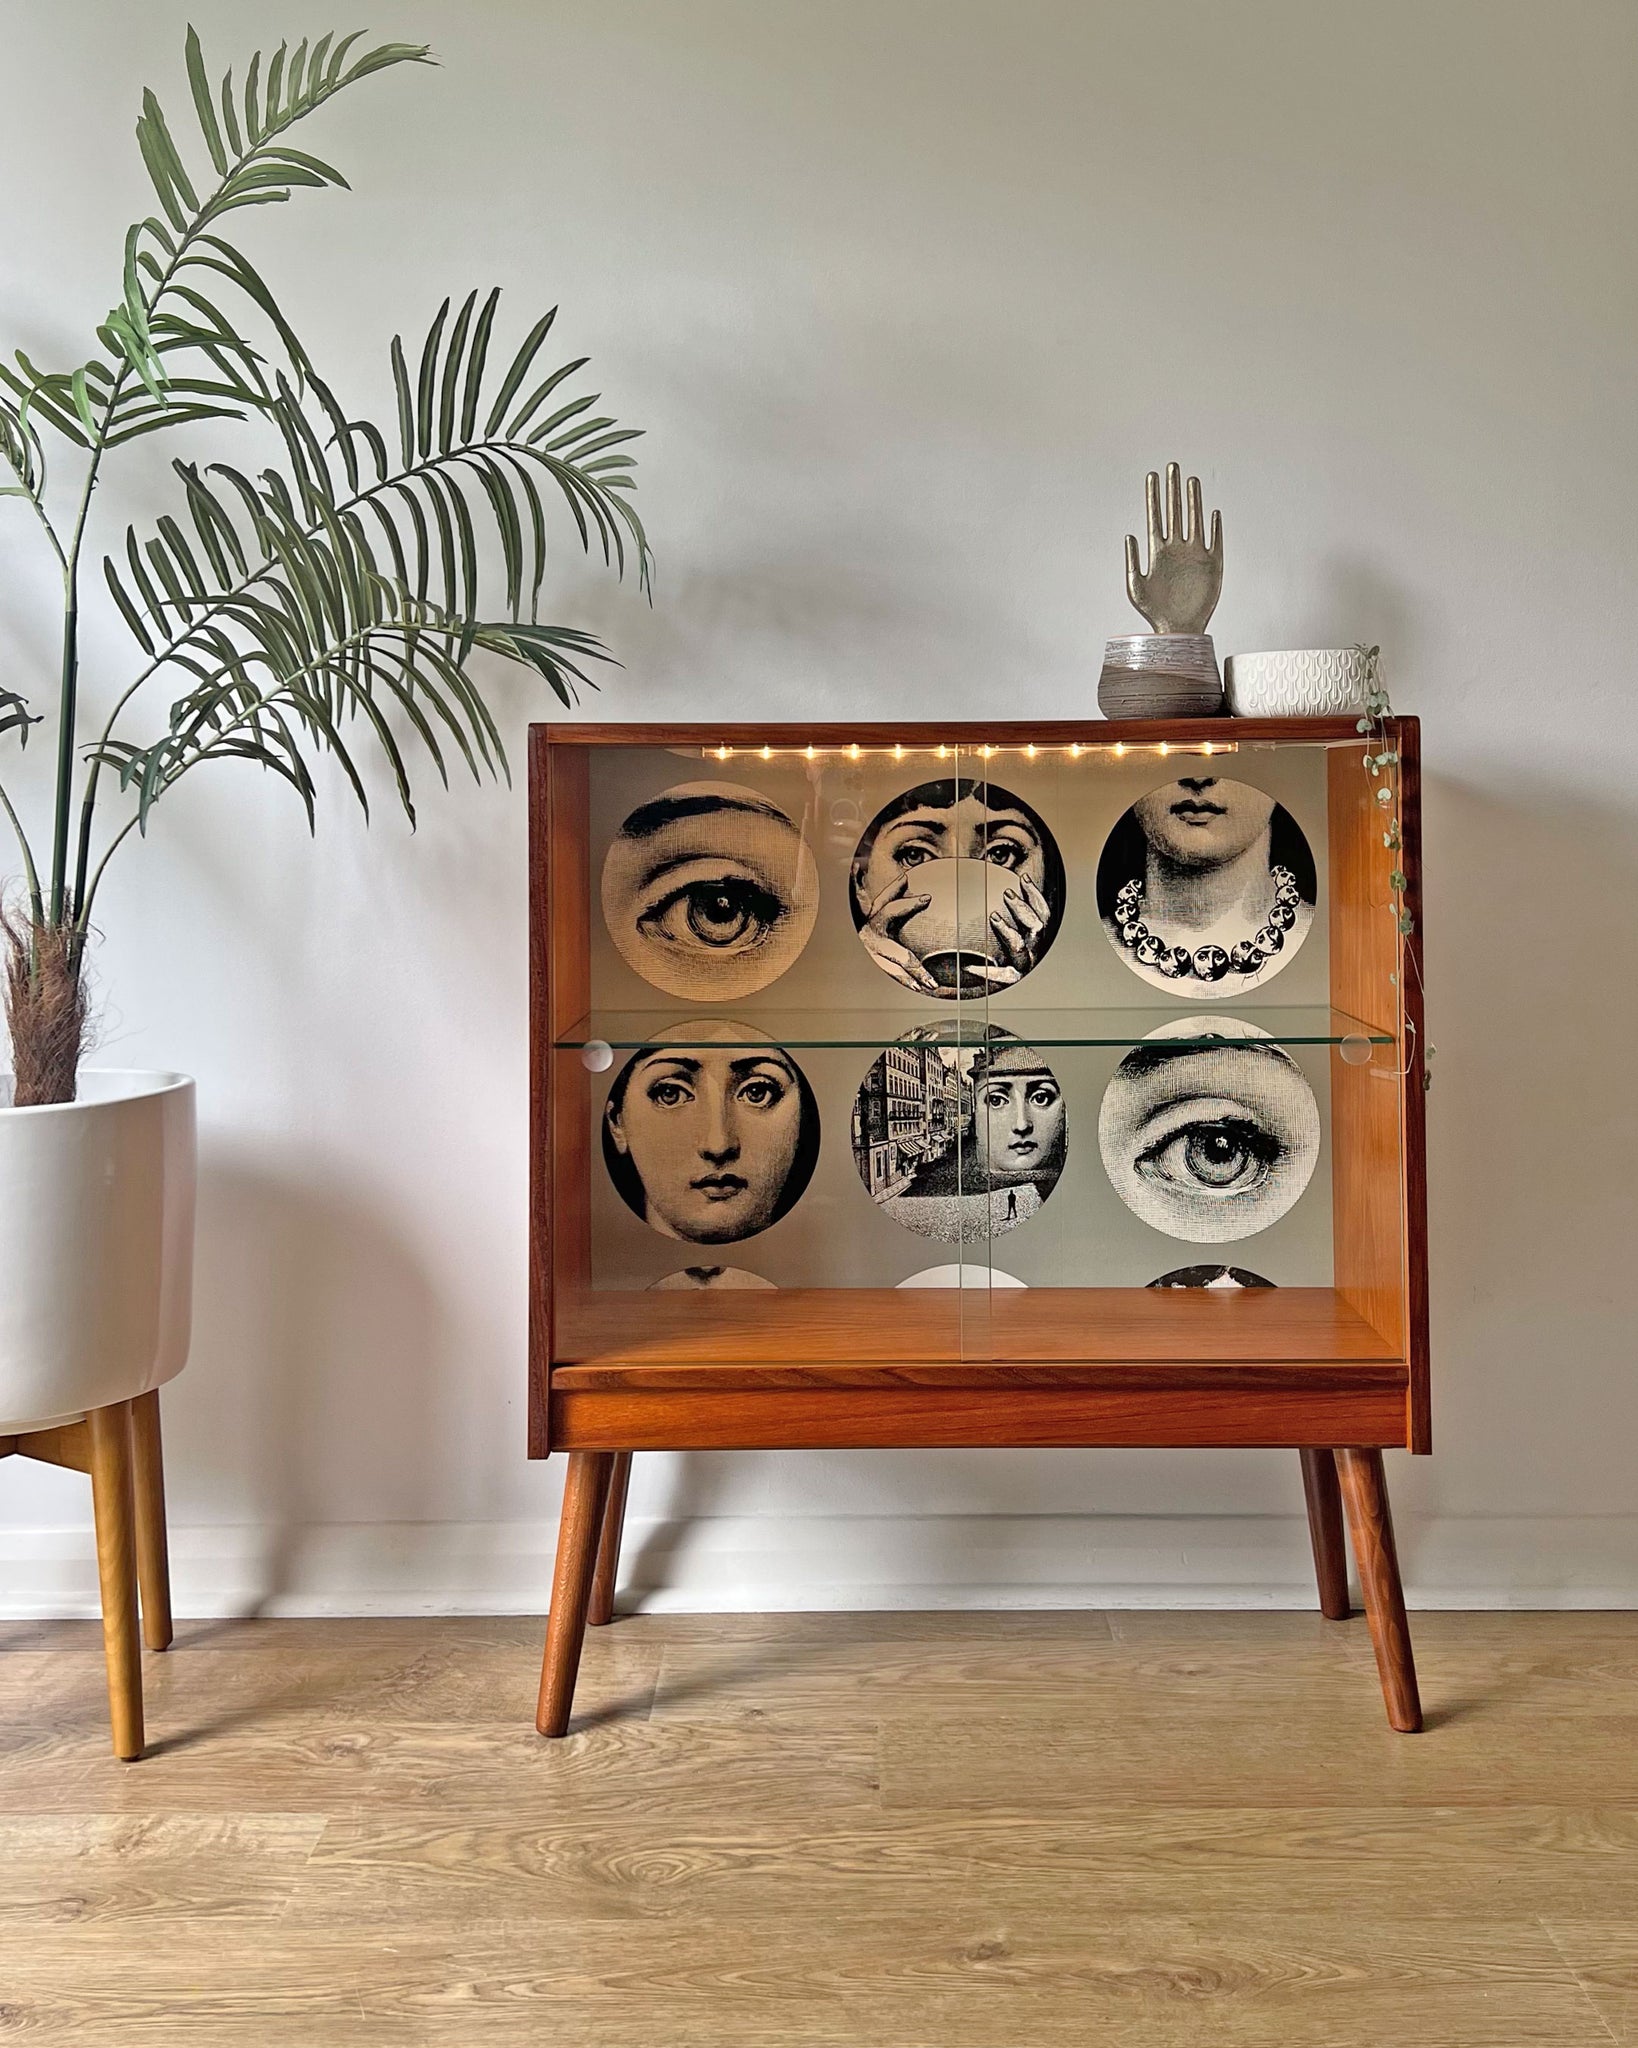 Vintage G Plan Teak Small Glass Fronted Display Drinks Cabinet - Fornasetti Tema E Variazioni